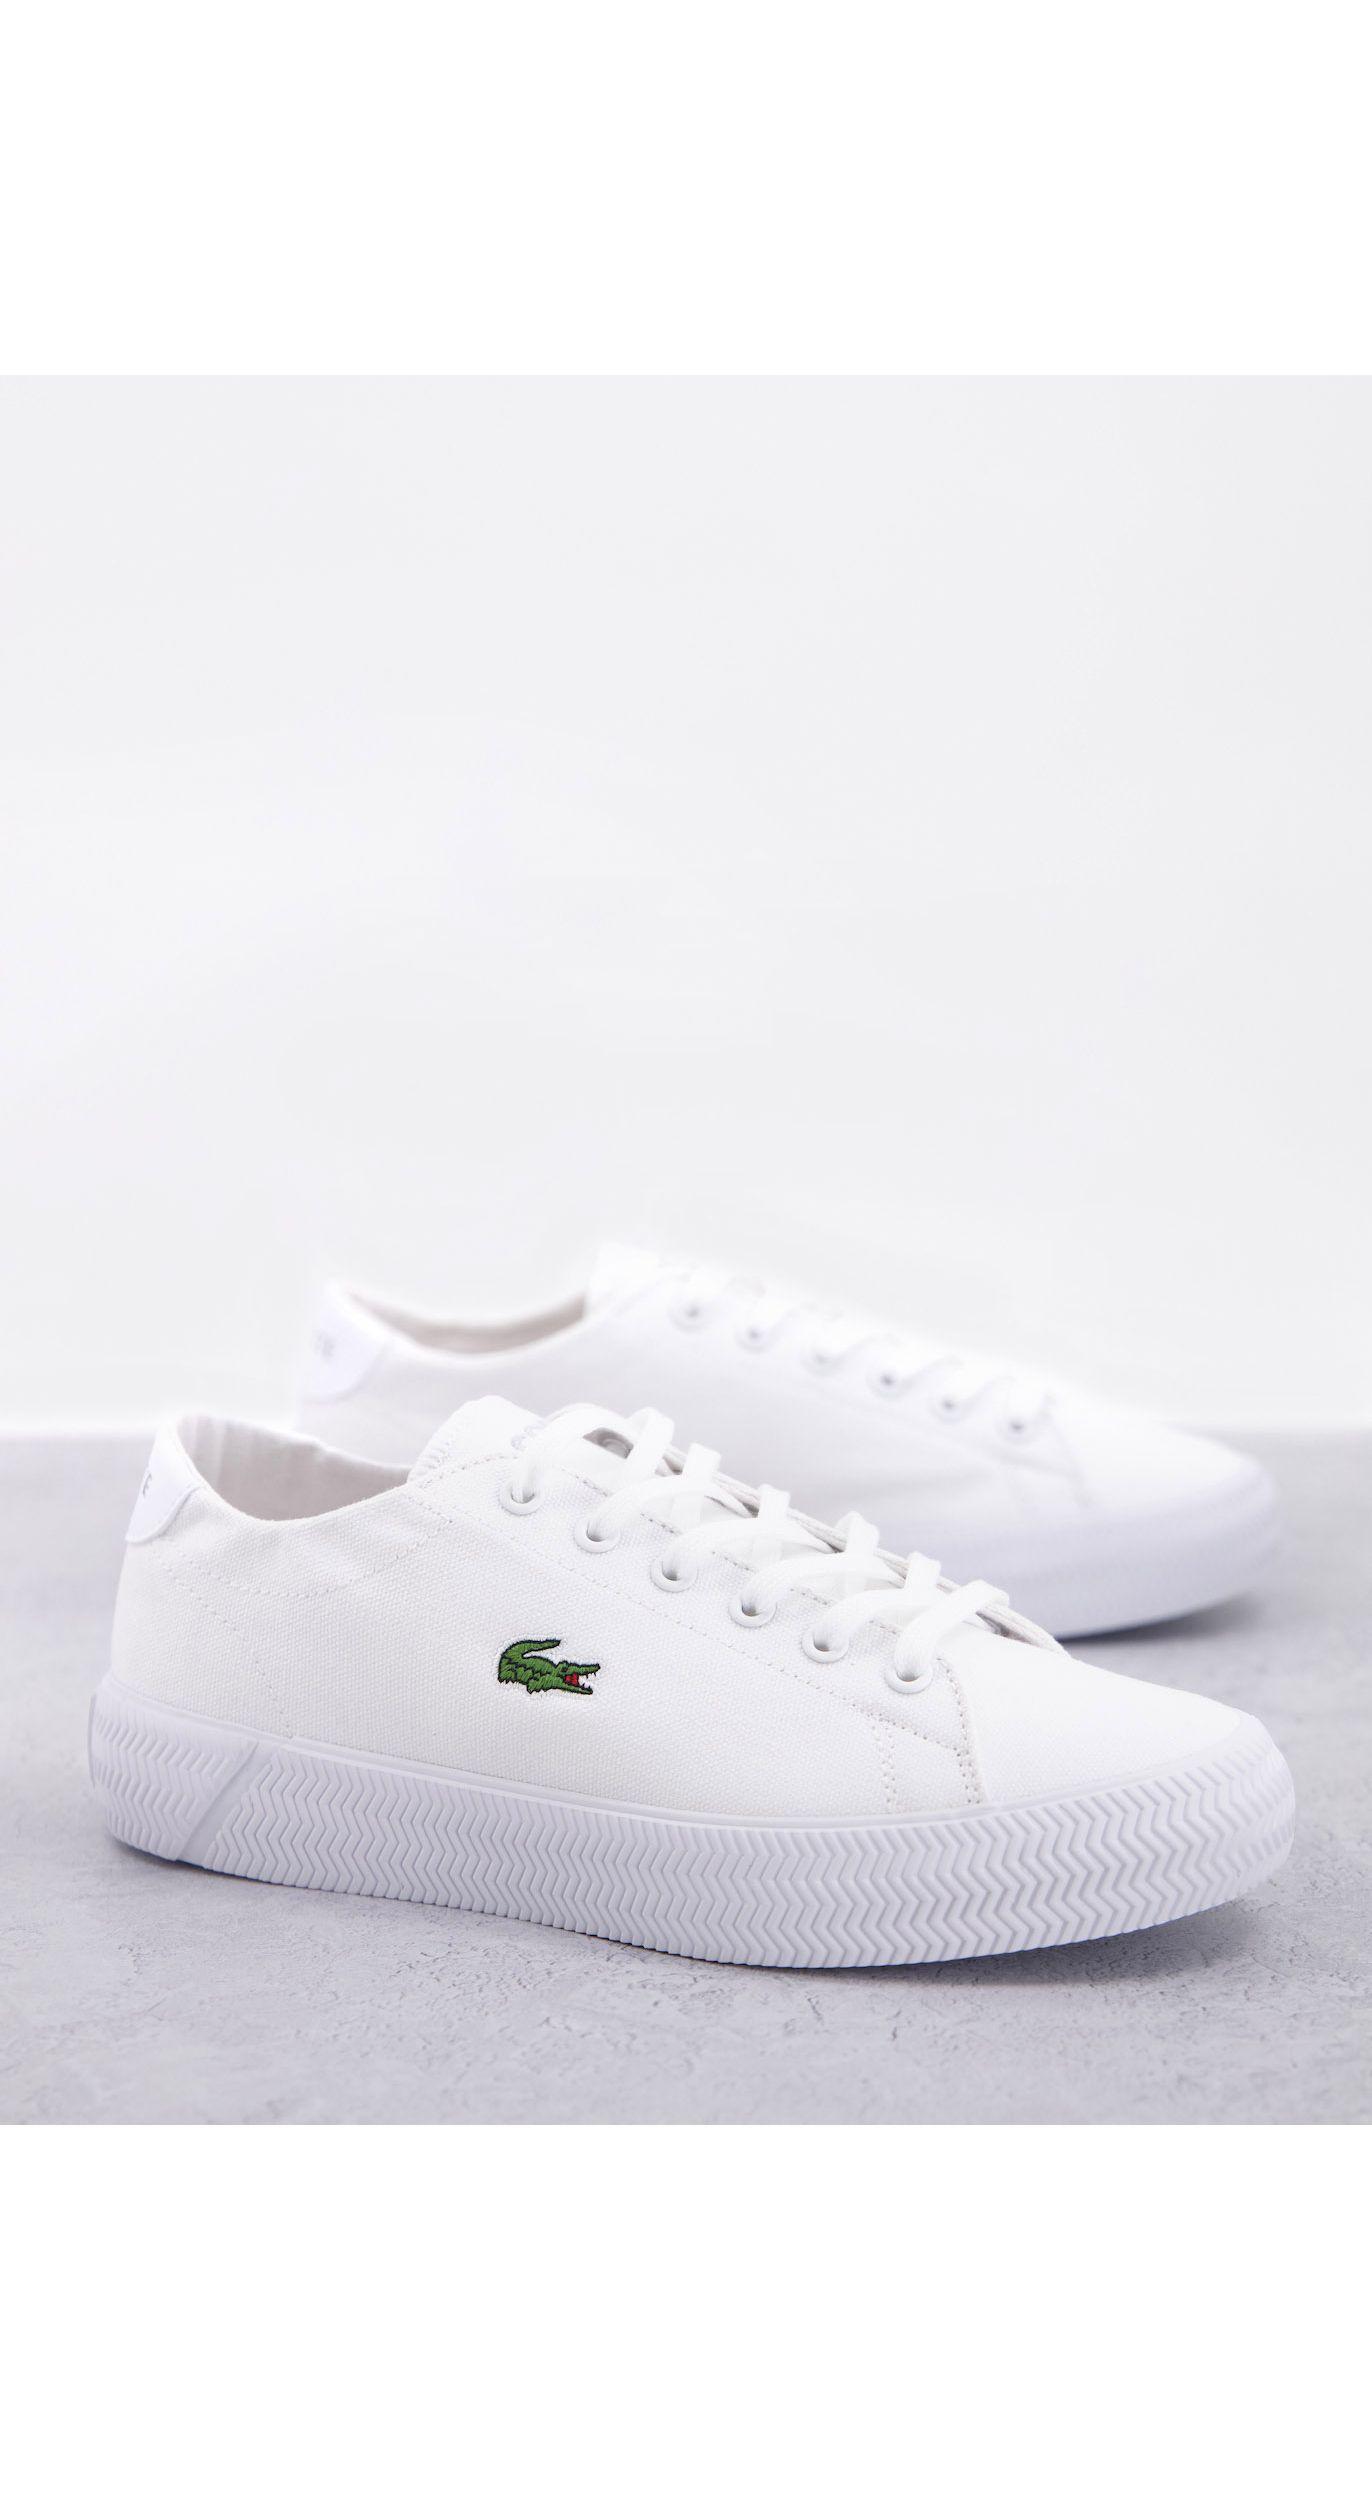 Lacoste Leather Gripshot Canvas Flatform Trainers in White | Lyst